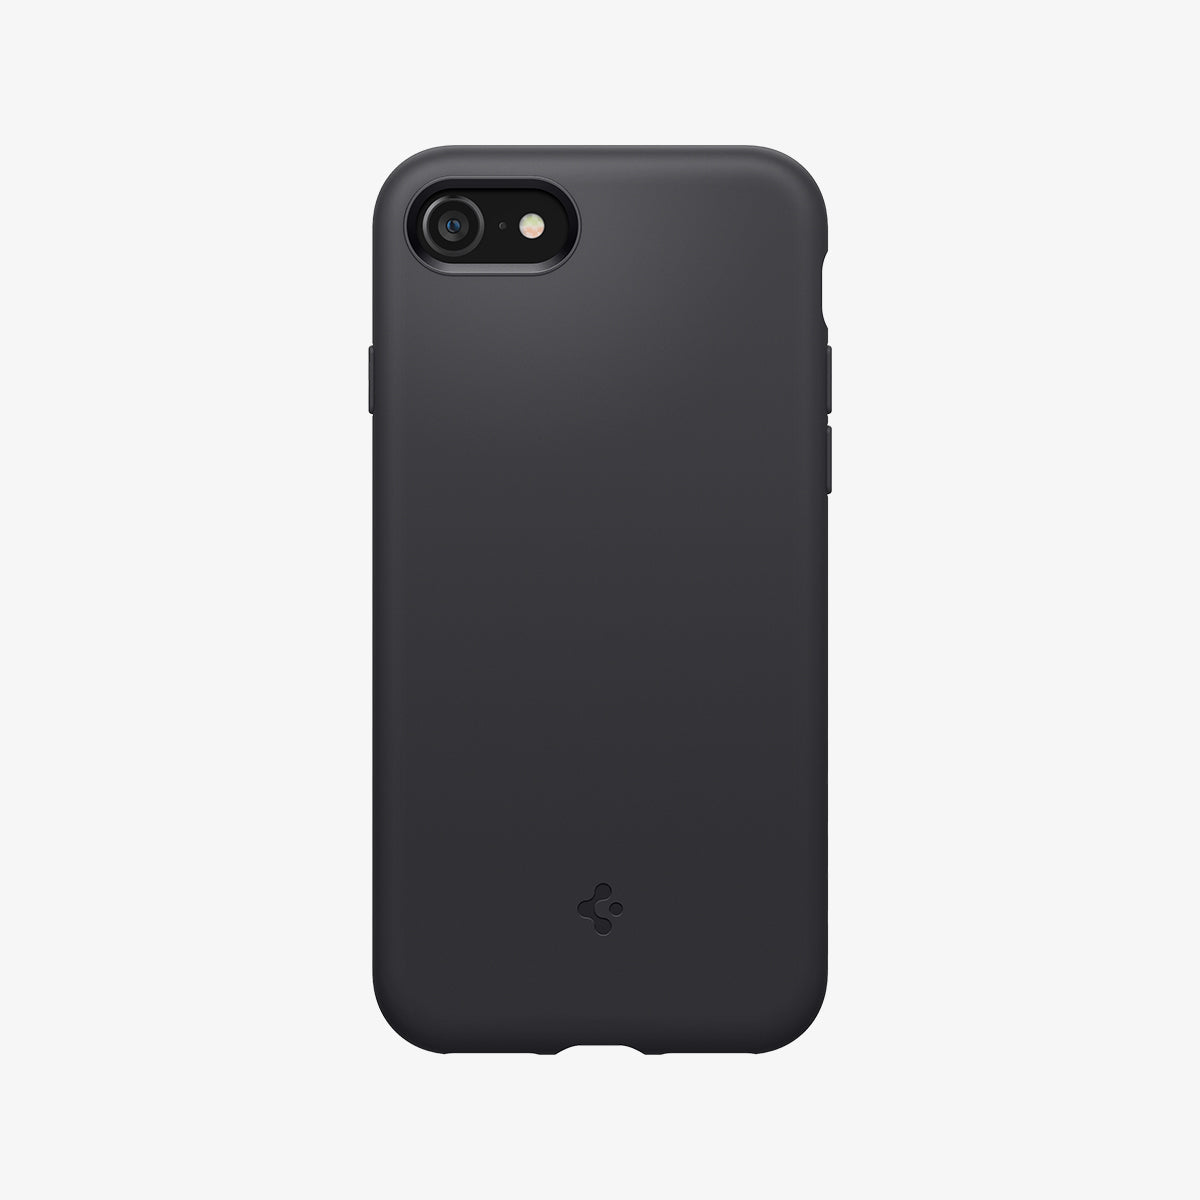 ACS04349 - iPhone SE Silicone Fit case in black showing the back